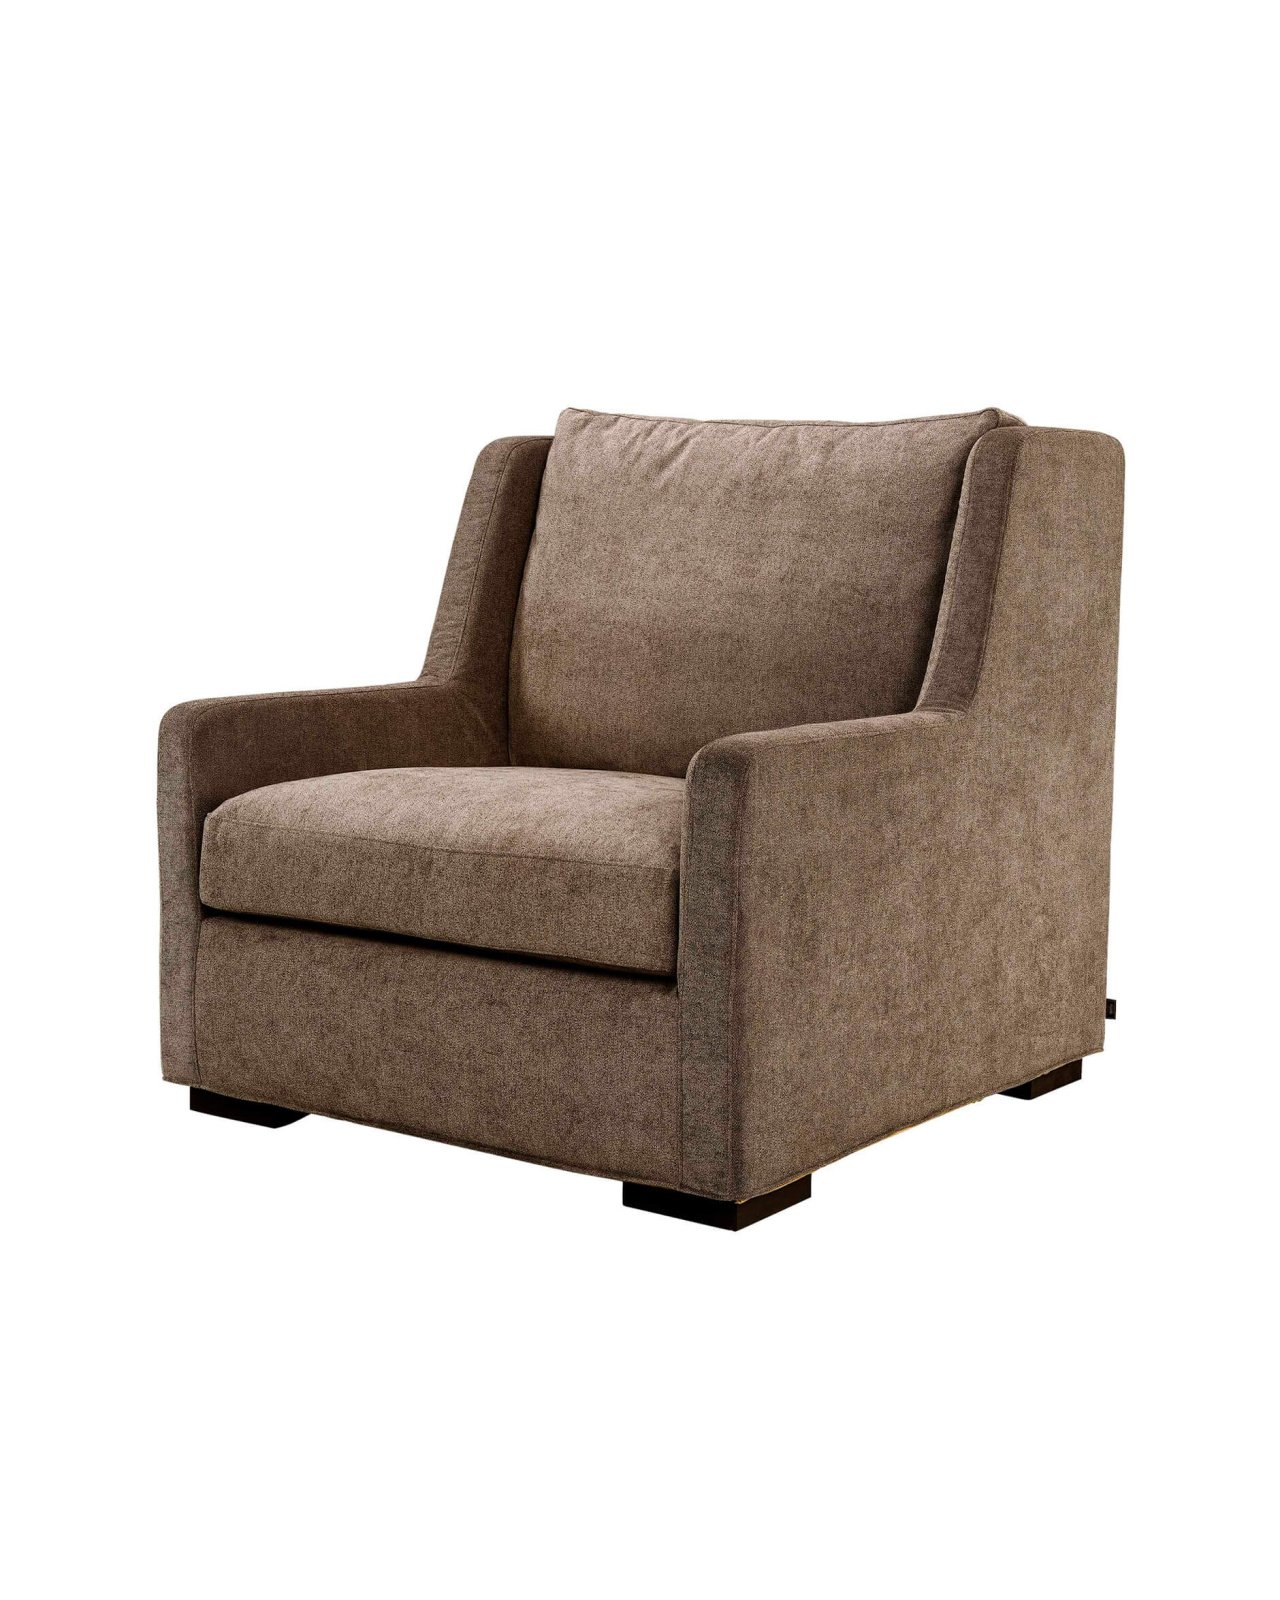 Dover armchair brown